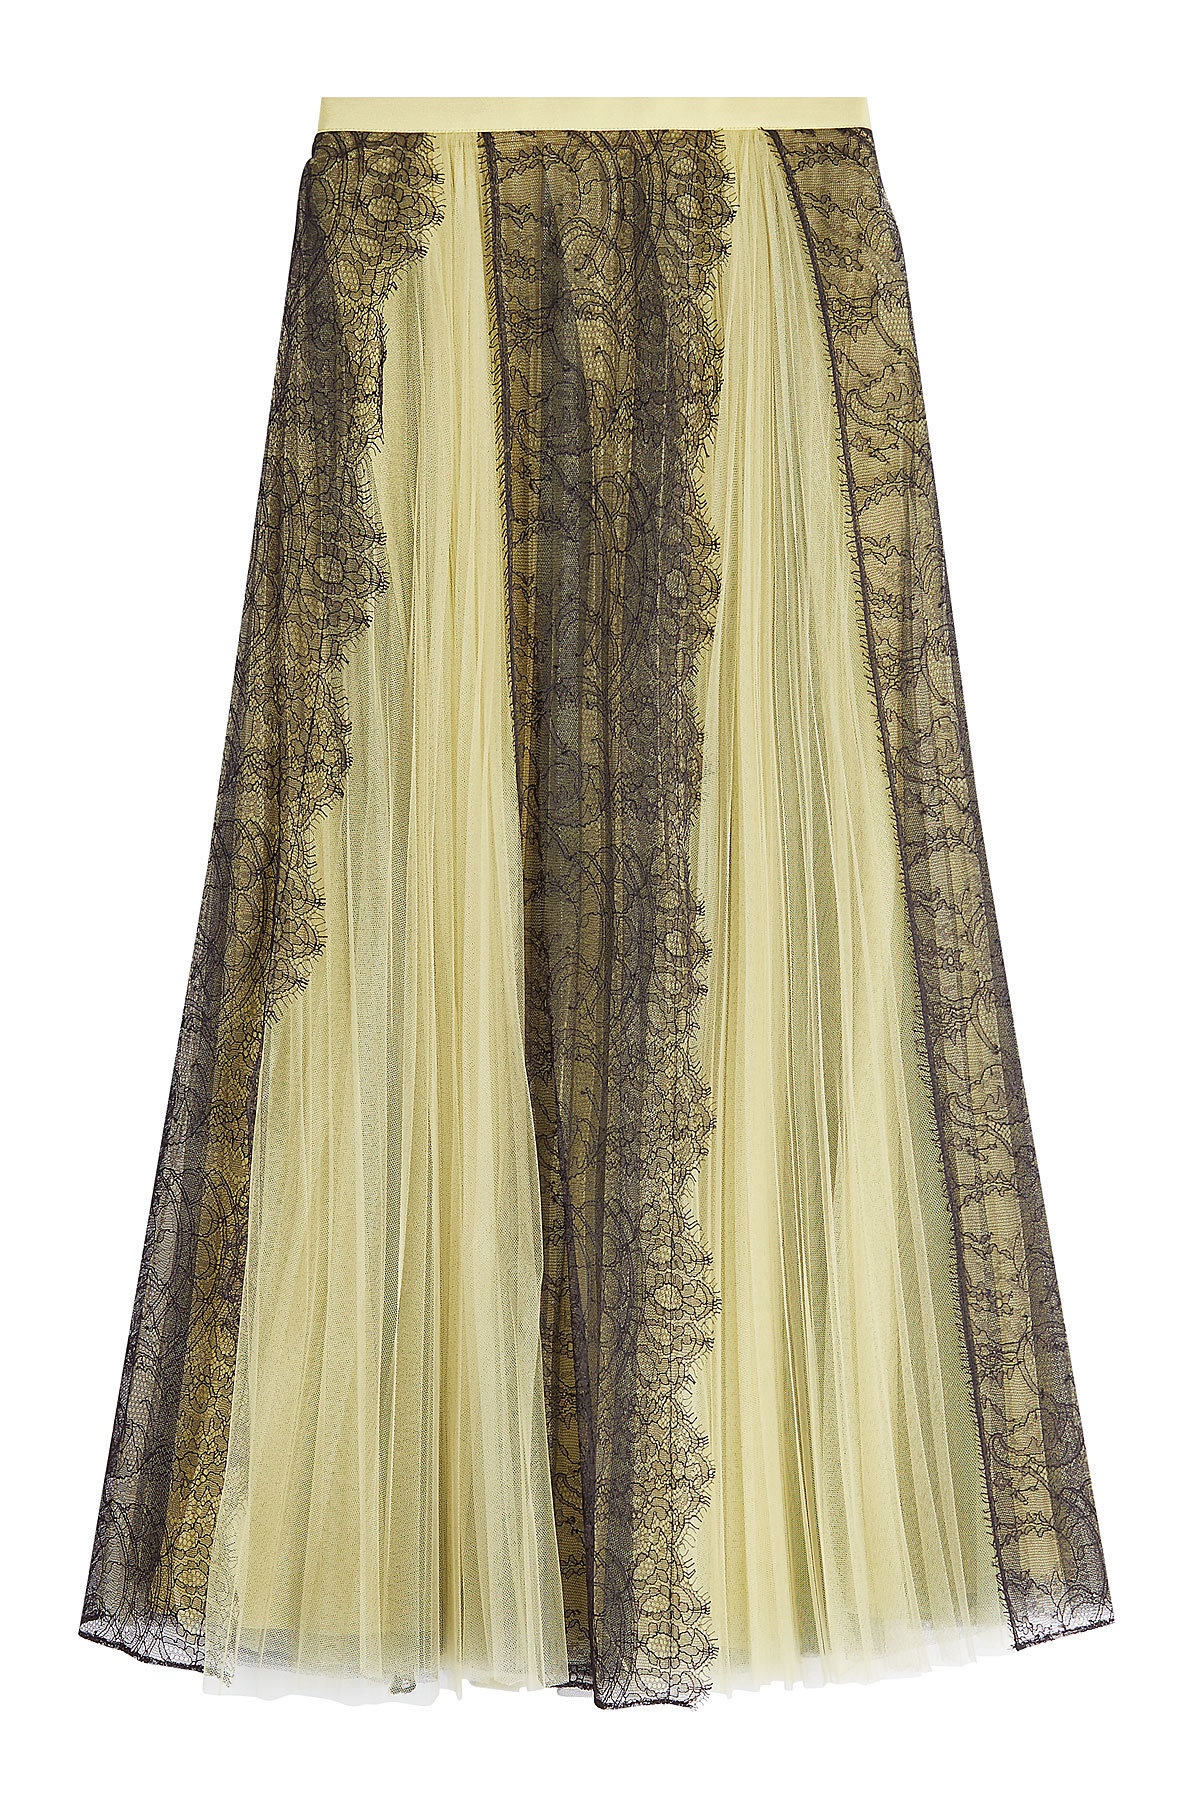 Silk Chiffon Skirt with Lace by Burberry